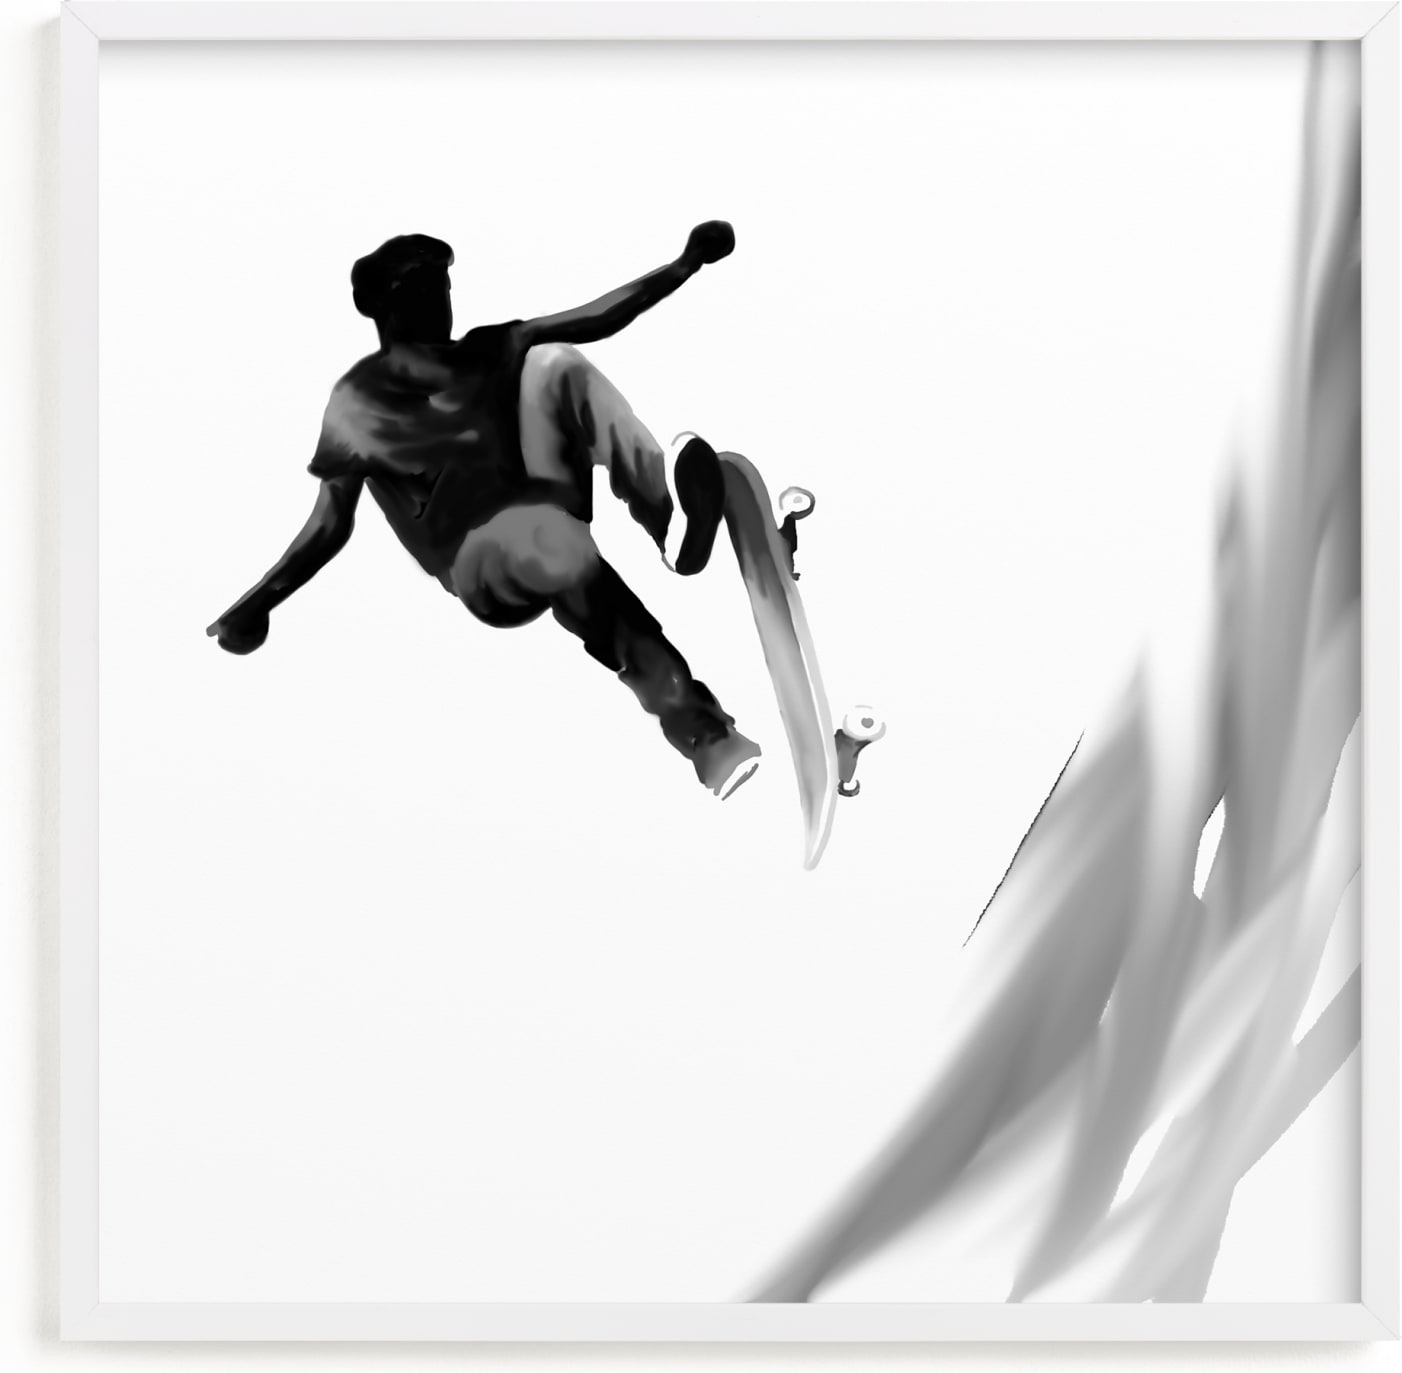 This is a black and white kids wall art by Amy Hall called Skate 2.